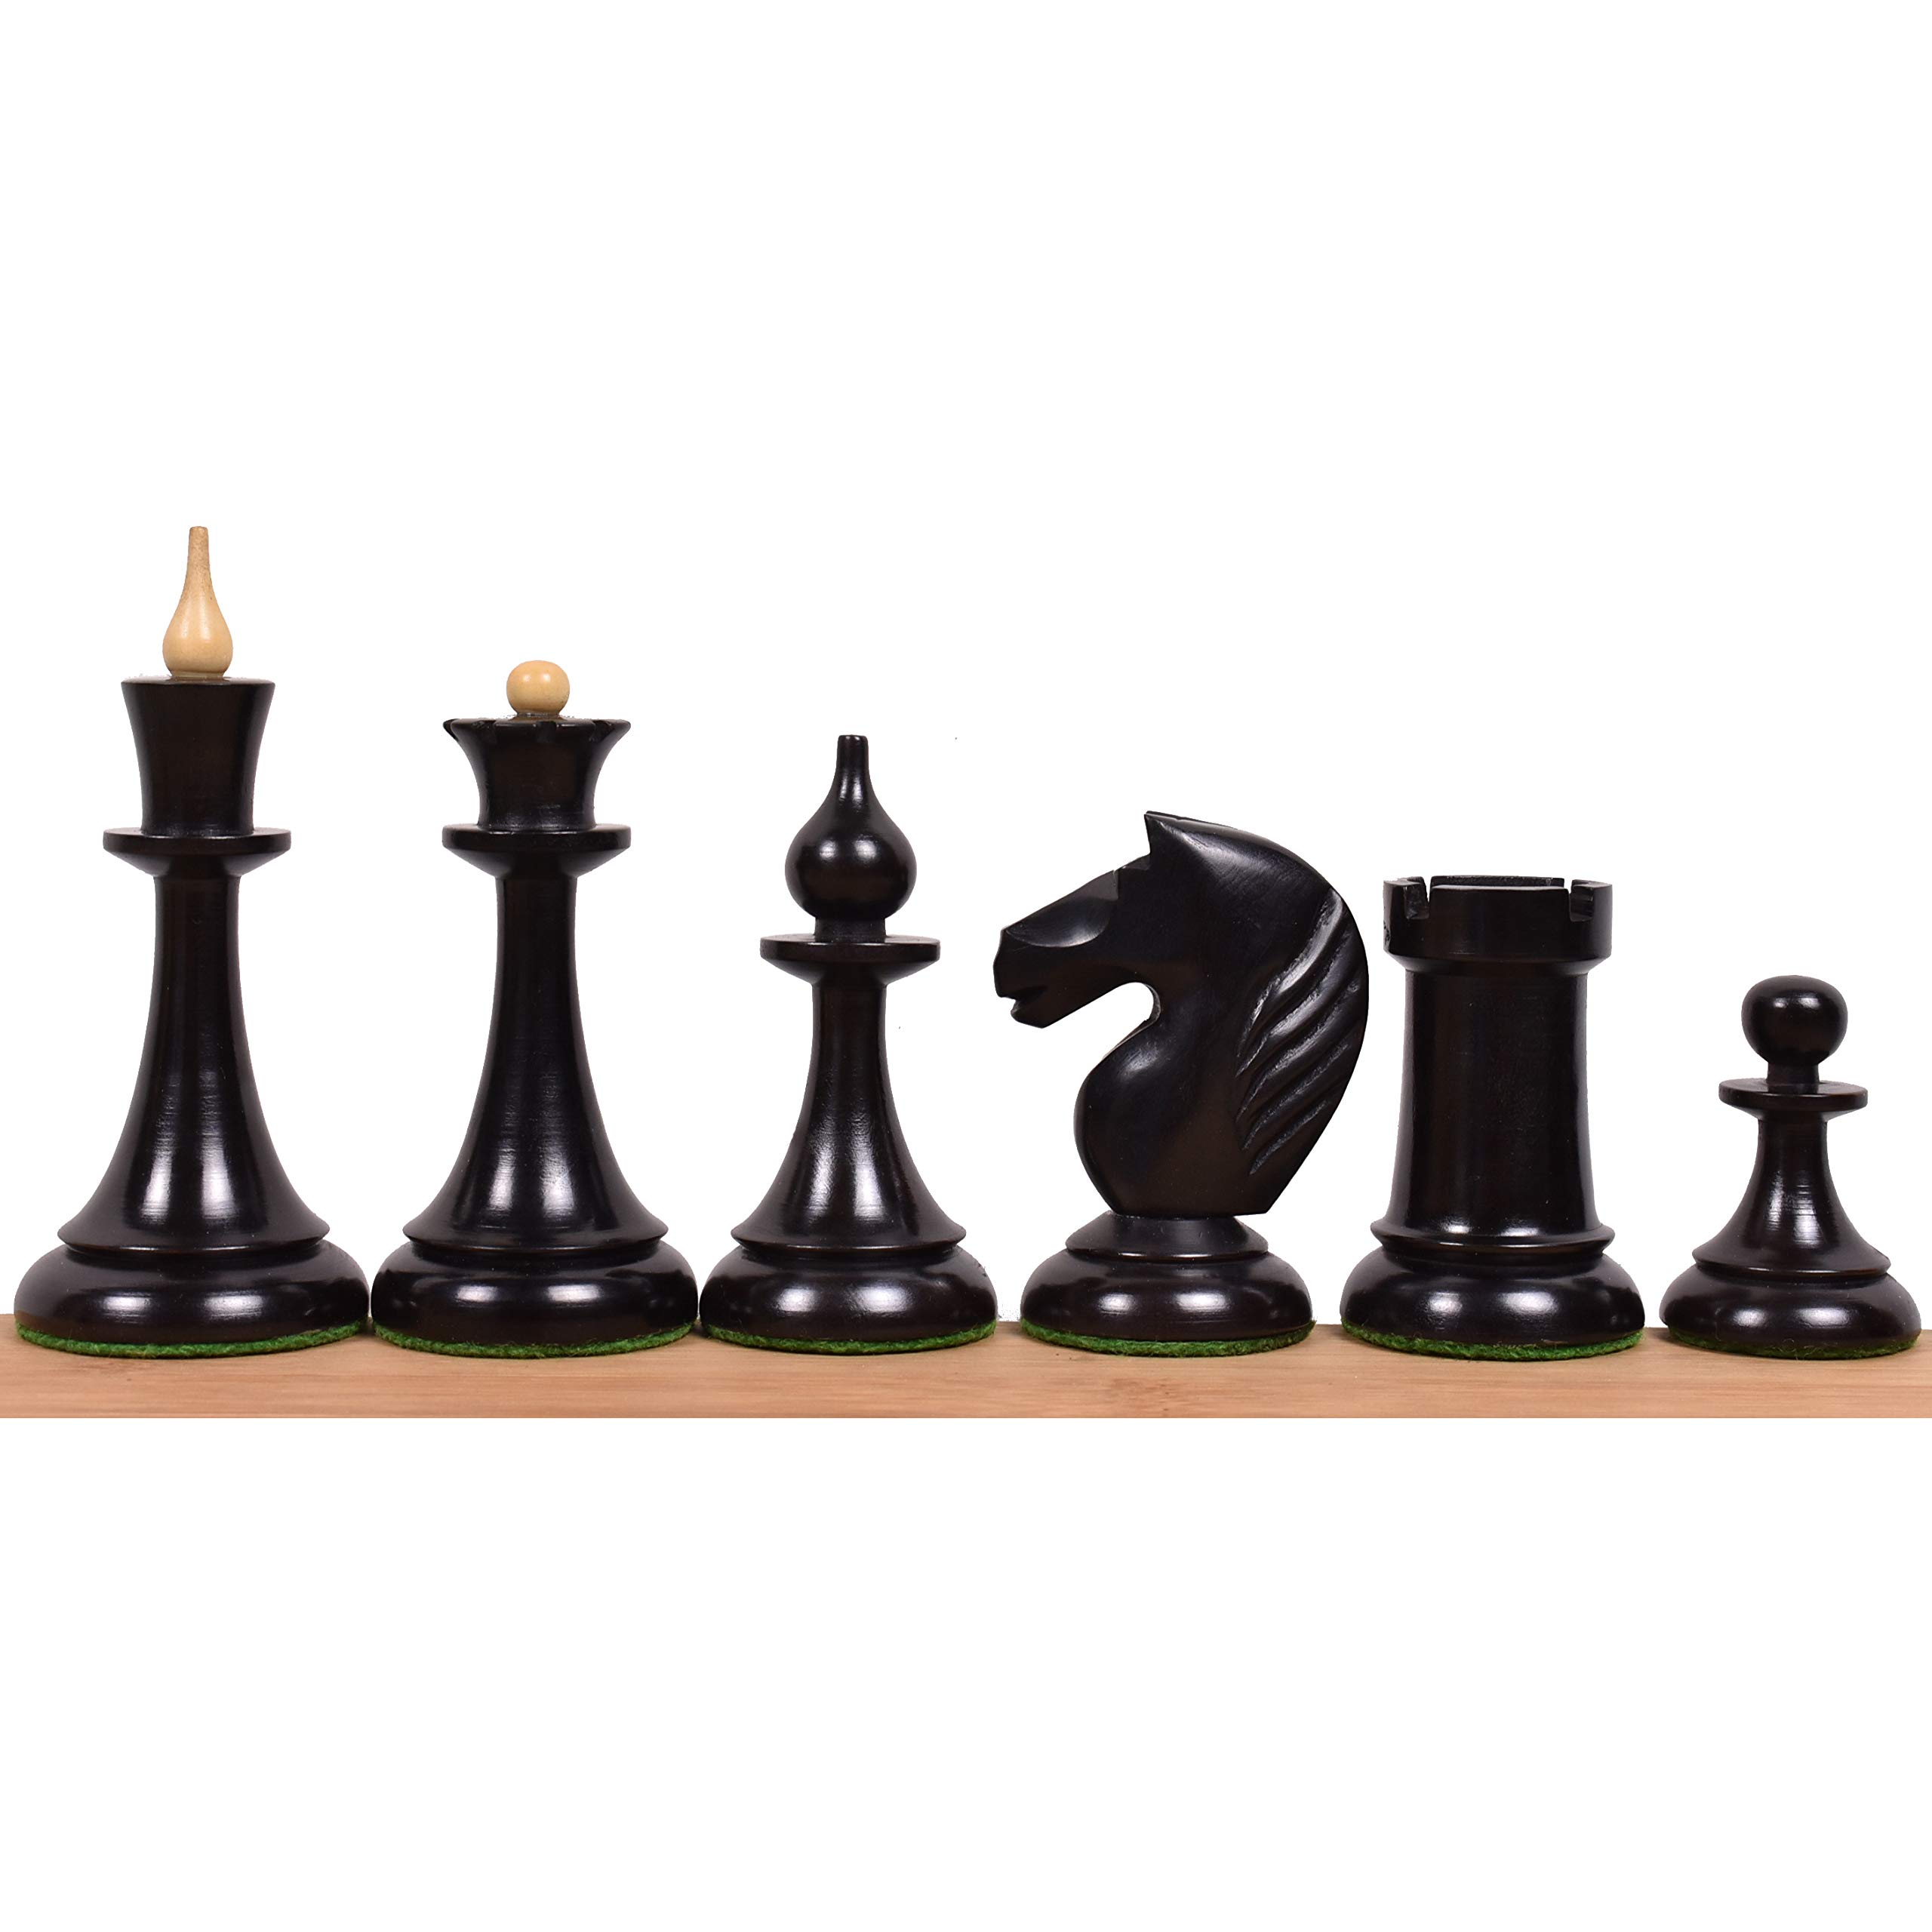 Royal Chess Mall 1950s Soviet Latvian Reproduced Chess Pieces Only Chess Set, Ebonized Boxwood Wooden Chess Set, 4-in King, Double Weighted Chess Pieces (2.5 lbs)